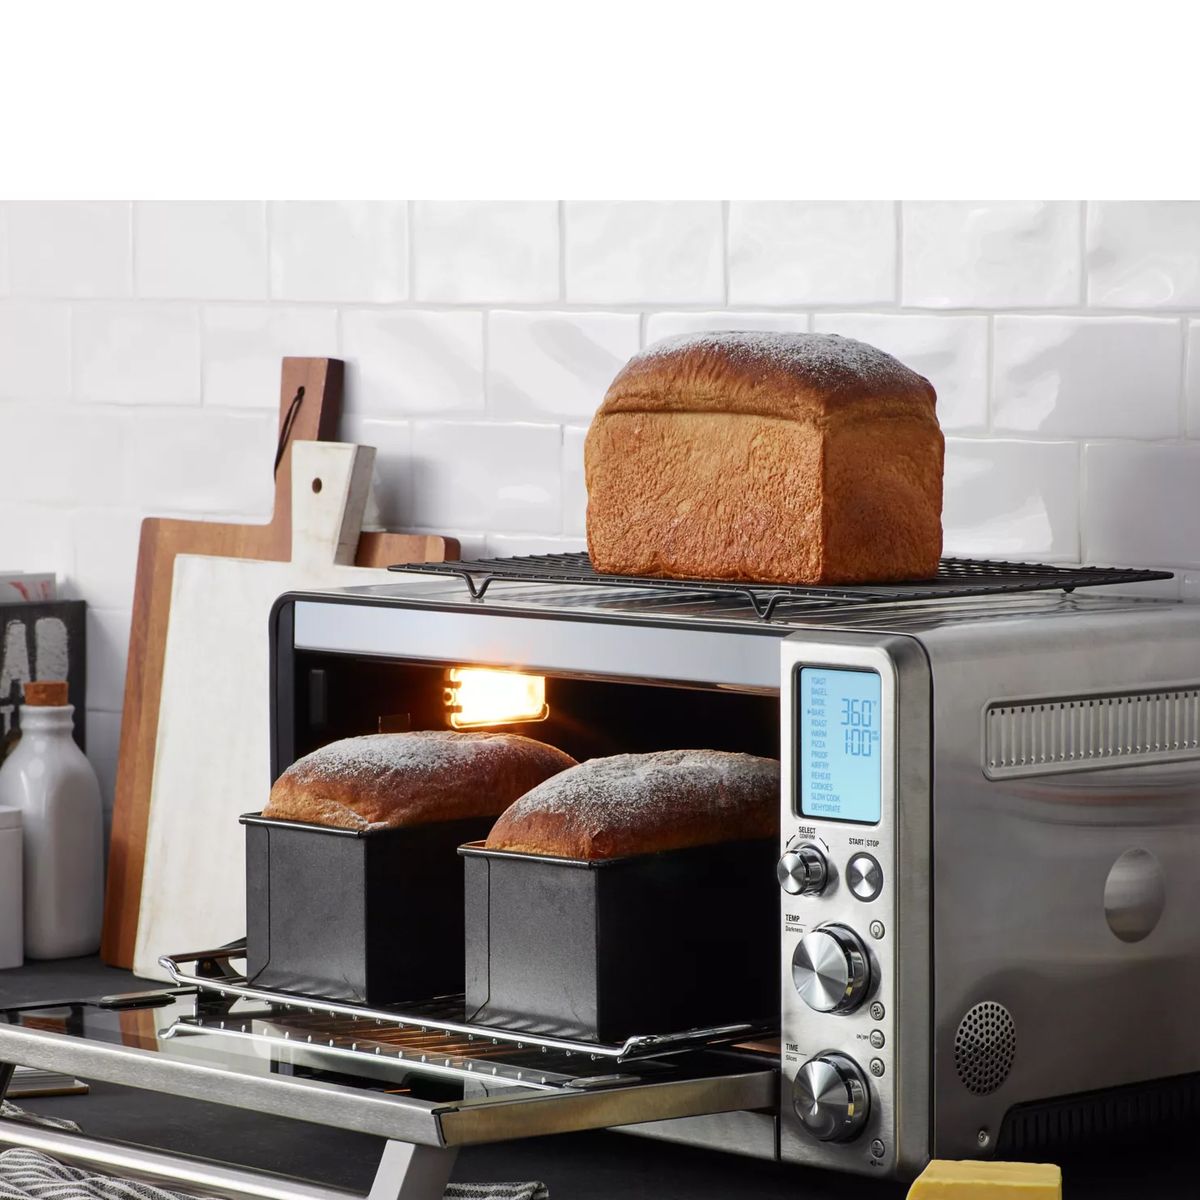 Top 5 Best Microwave Toaster Ovens Combo in 2023 [Reviews & Buying Guide] 